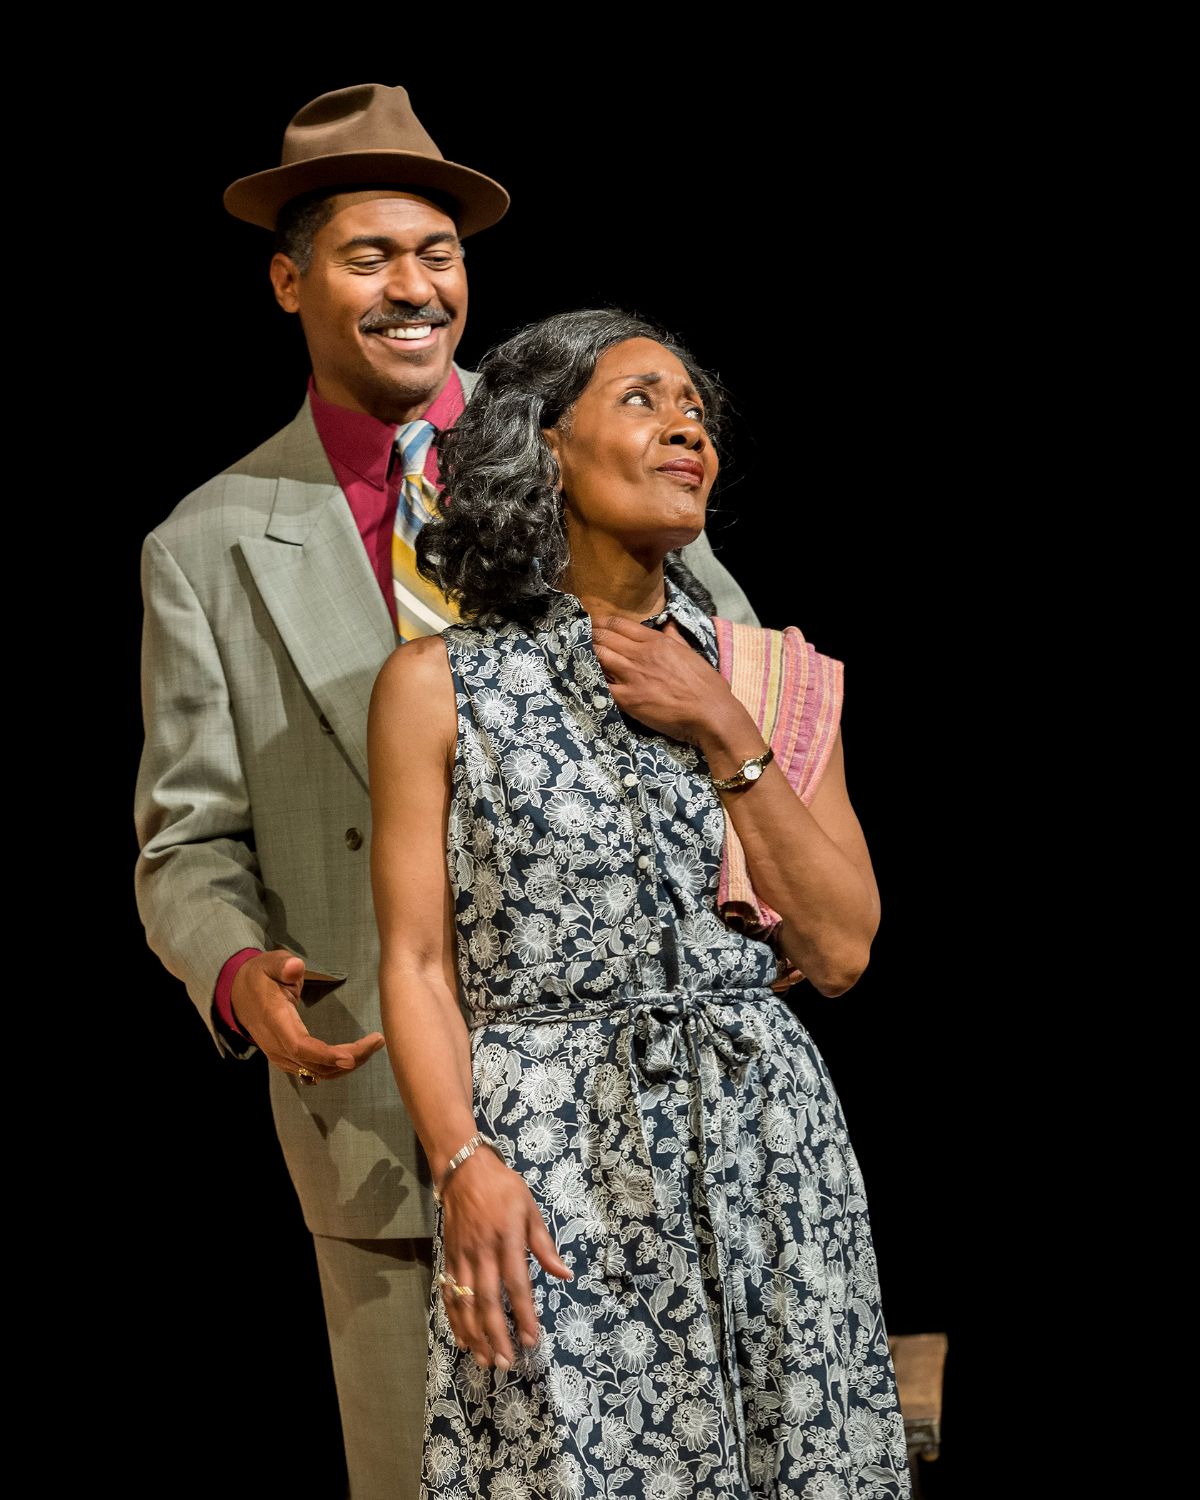 PHOTO: Craig Schwartz | The South Pasadenan | Ben Cain and Veralyn Jones in King Hedley II at A Noise Within.